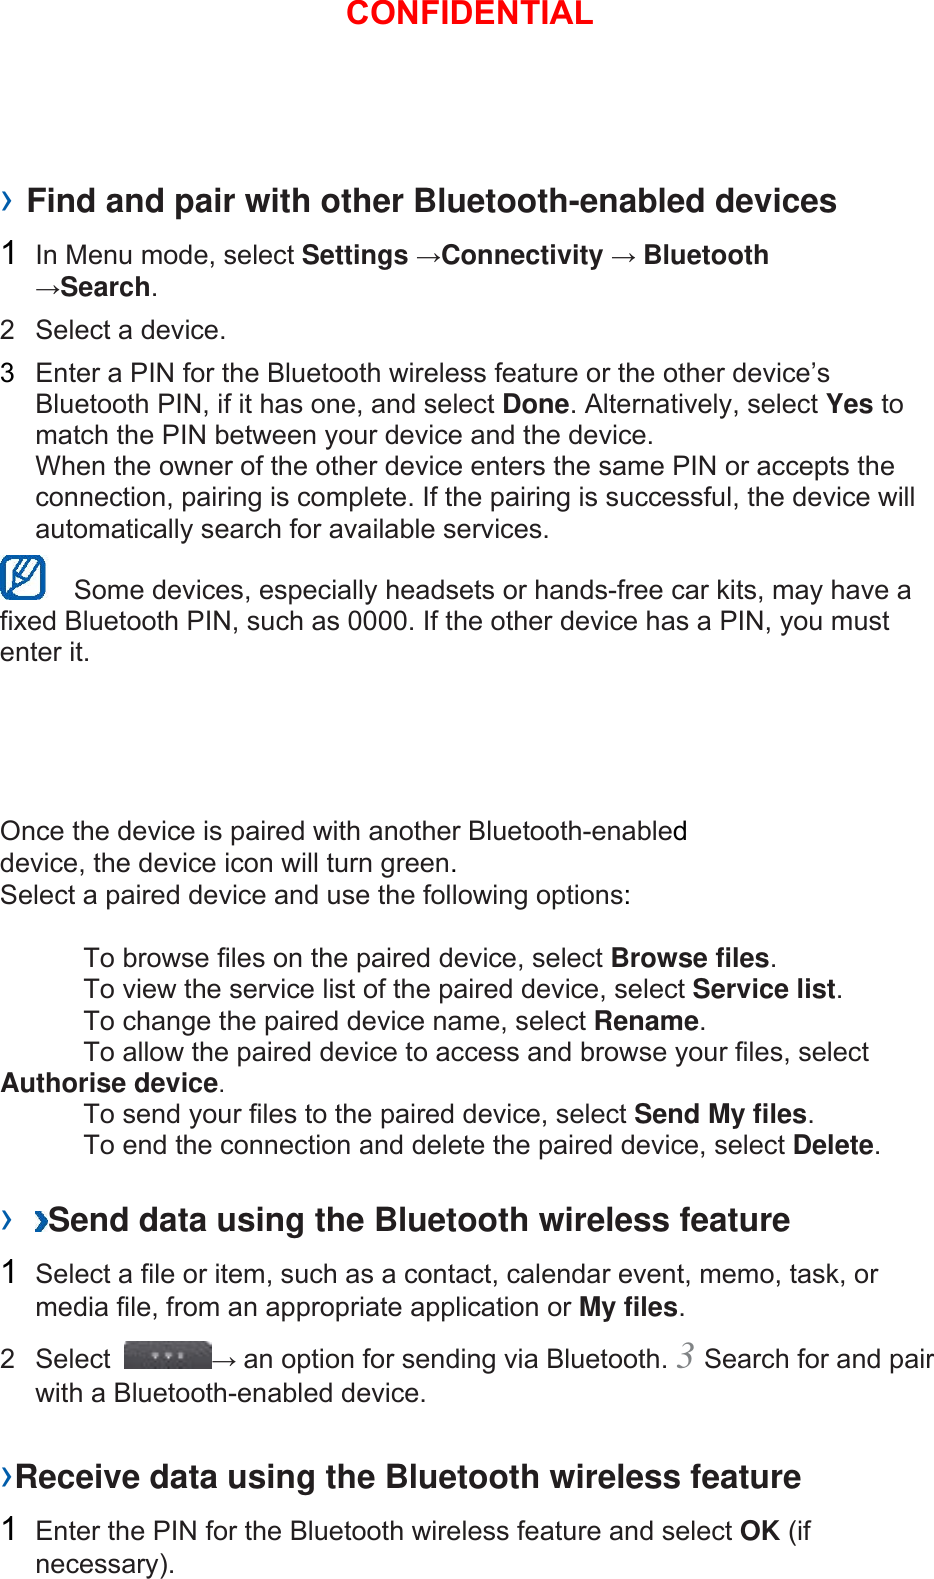 › Find and pair with other Bluetooth-enabled devices   1  In Menu mode, select Settings →Connectivity → Bluetooth →Search.  2  Select a device.   3  Enter a PIN for the Bluetooth wireless feature or the other device’s Bluetooth PIN, if it has one, and select Done. Alternatively, select Yes to match the PIN between your device and the device.   When the owner of the other device enters the same PIN or accepts the connection, pairing is complete. If the pairing is successful, the device will automatically search for available services.     Some devices, especially headsets or hands-free car kits, may have a fixed Bluetooth PIN, such as 0000. If the other device has a PIN, you must enter it.   Once the device is paired with another Bluetooth-enabled device, the device icon will turn green. Select a paired device and use the following options:    To browse files on the paired device, select Browse files.    To view the service list of the paired device, select Service list.    To change the paired device name, select Rename.   To allow the paired device to access and browse your files, select Authorise device.    To send your files to the paired device, select Send My files.    To end the connection and delete the paired device, select Delete.   ›  Send data using the Bluetooth wireless feature   1  Select a file or item, such as a contact, calendar event, memo, task, or media file, from an appropriate application or My files.  2 Select  → an option for sending via Bluetooth. 3 Search for and pair with a Bluetooth-enabled device.   ›Receive data using the Bluetooth wireless feature   1  Enter the PIN for the Bluetooth wireless feature and select OK (if necessary).  CONFIDENTIAL